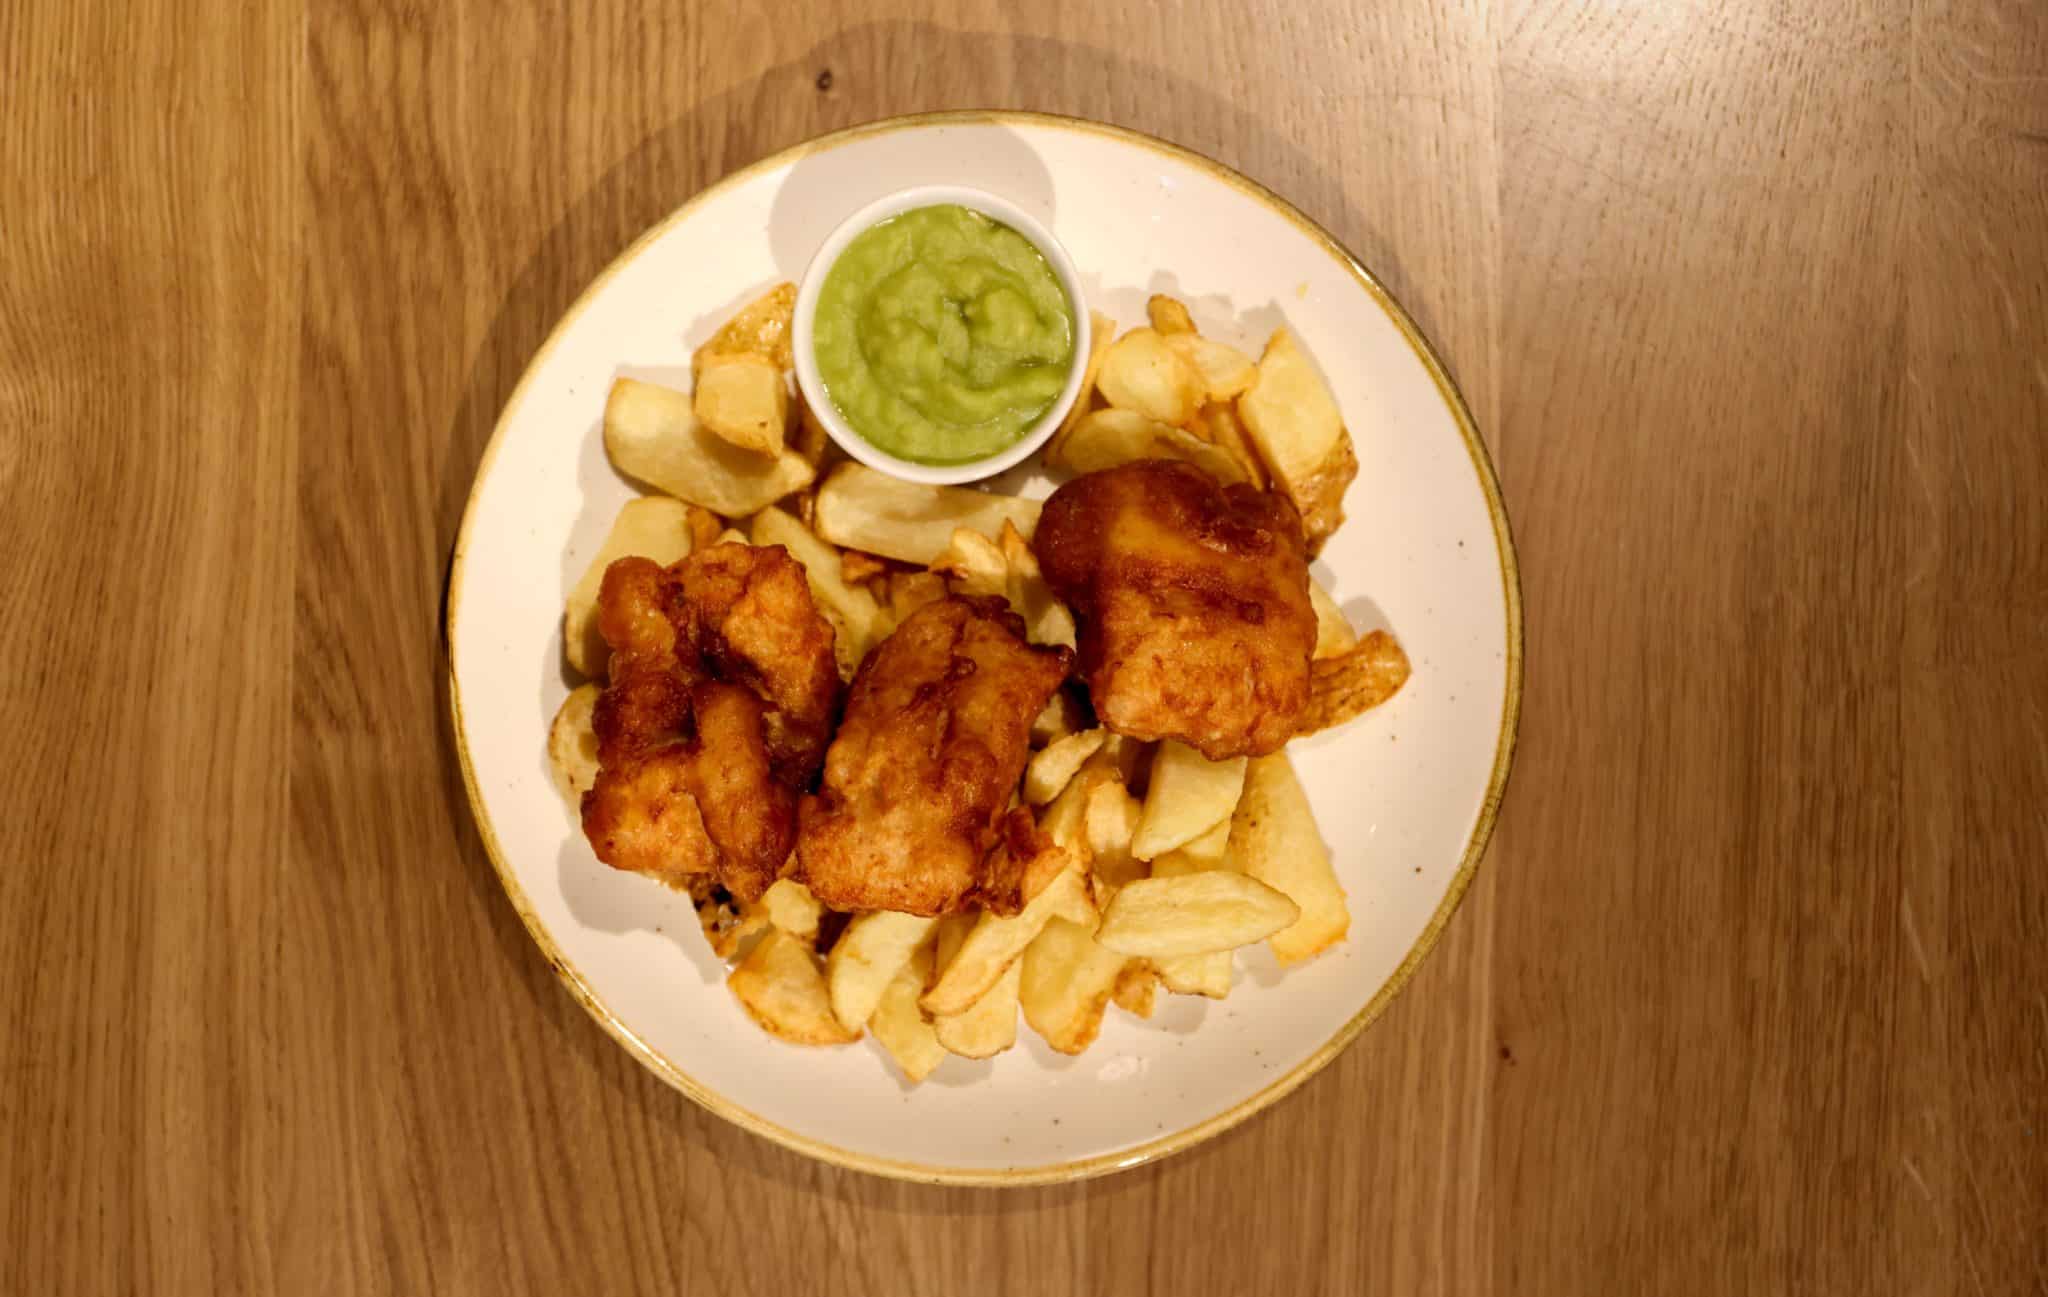 hip-hop-chip-shop-fish-and-chips-mushy-peas-plate